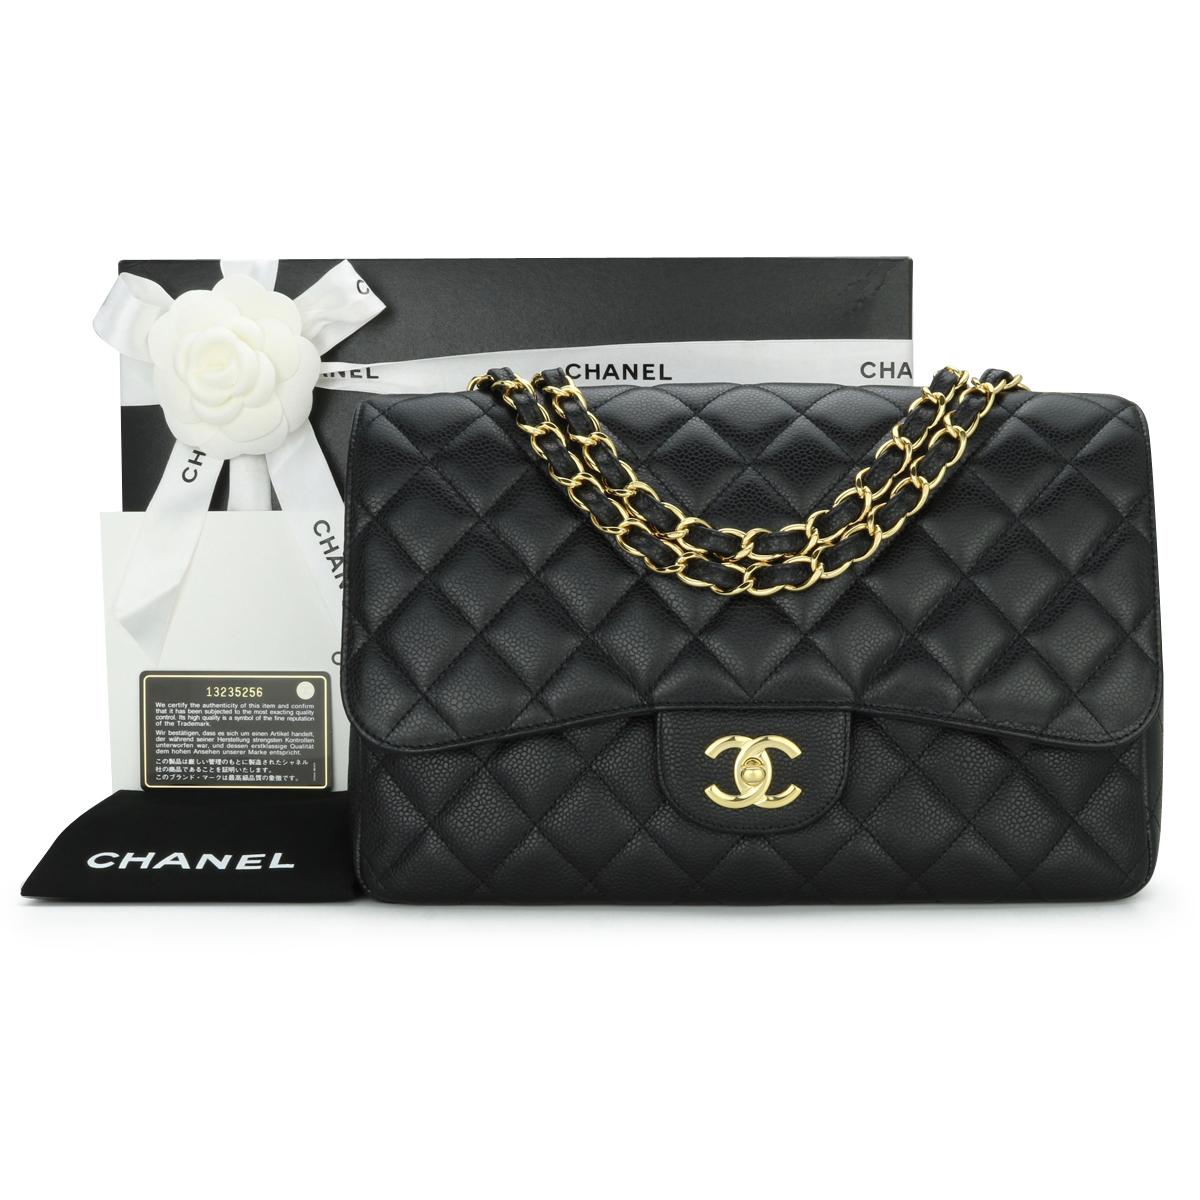 CHANEL Classic Single Flap Jumbo Bag Black Caviar with Gold Hardware 2010.

This stunning bag is in excellent – pristine condition; it still holds its original shape, and the hardware is still very shiny. It is such a lightweight bag compared to